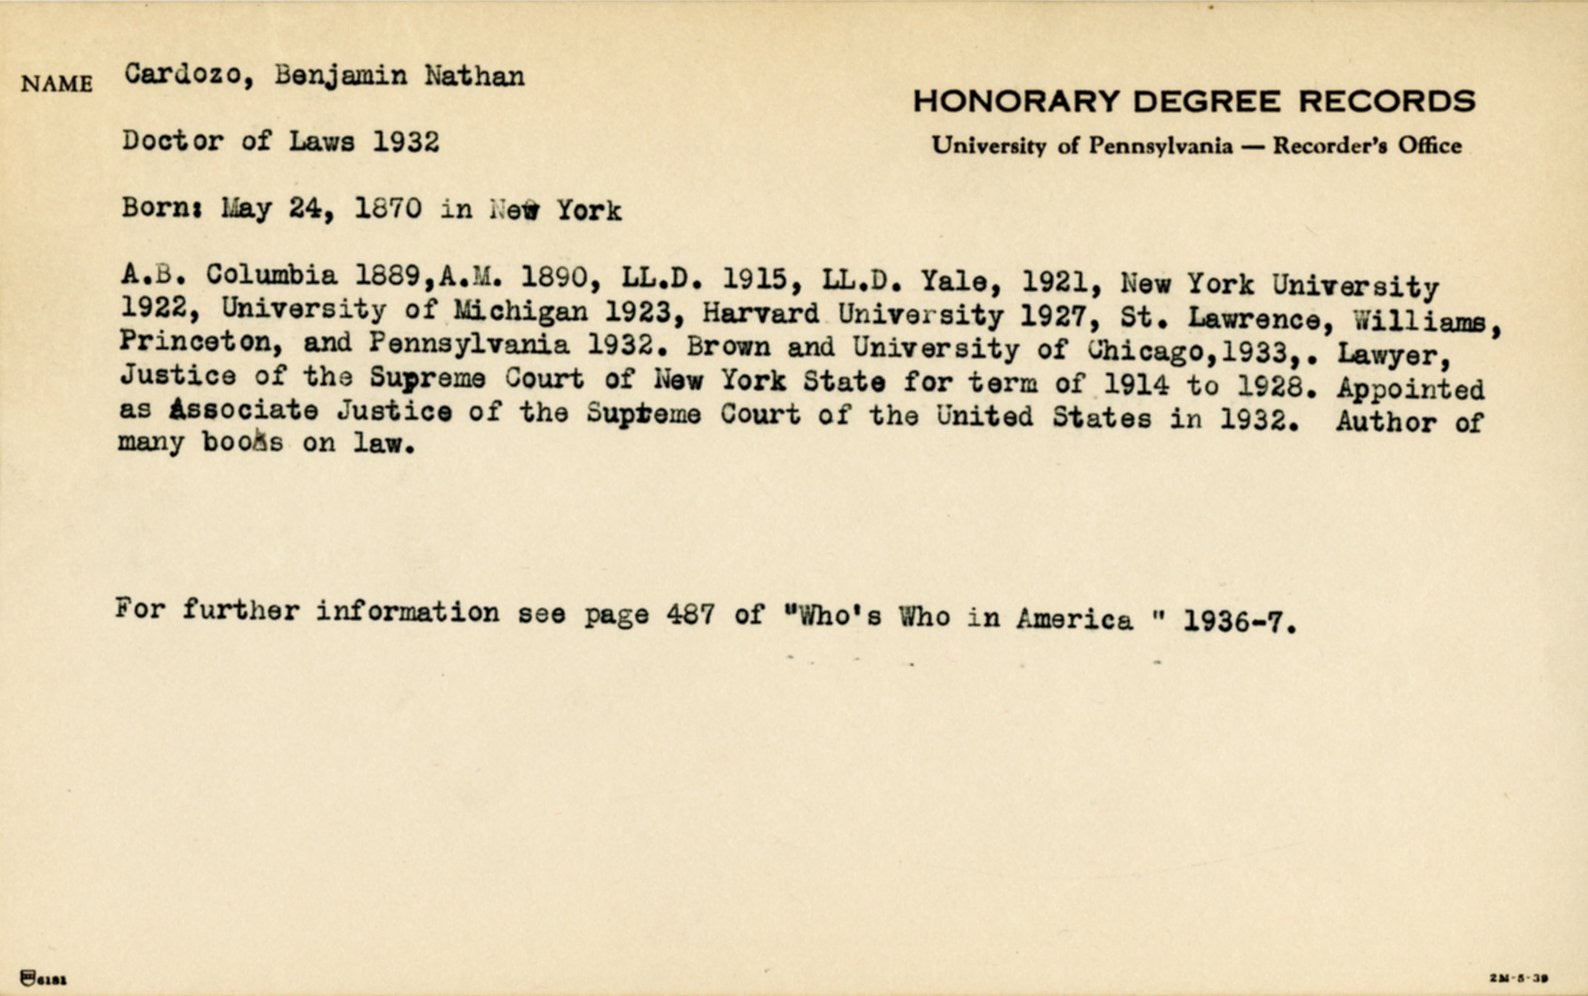 Card for honorary degree recipient, c. 1938